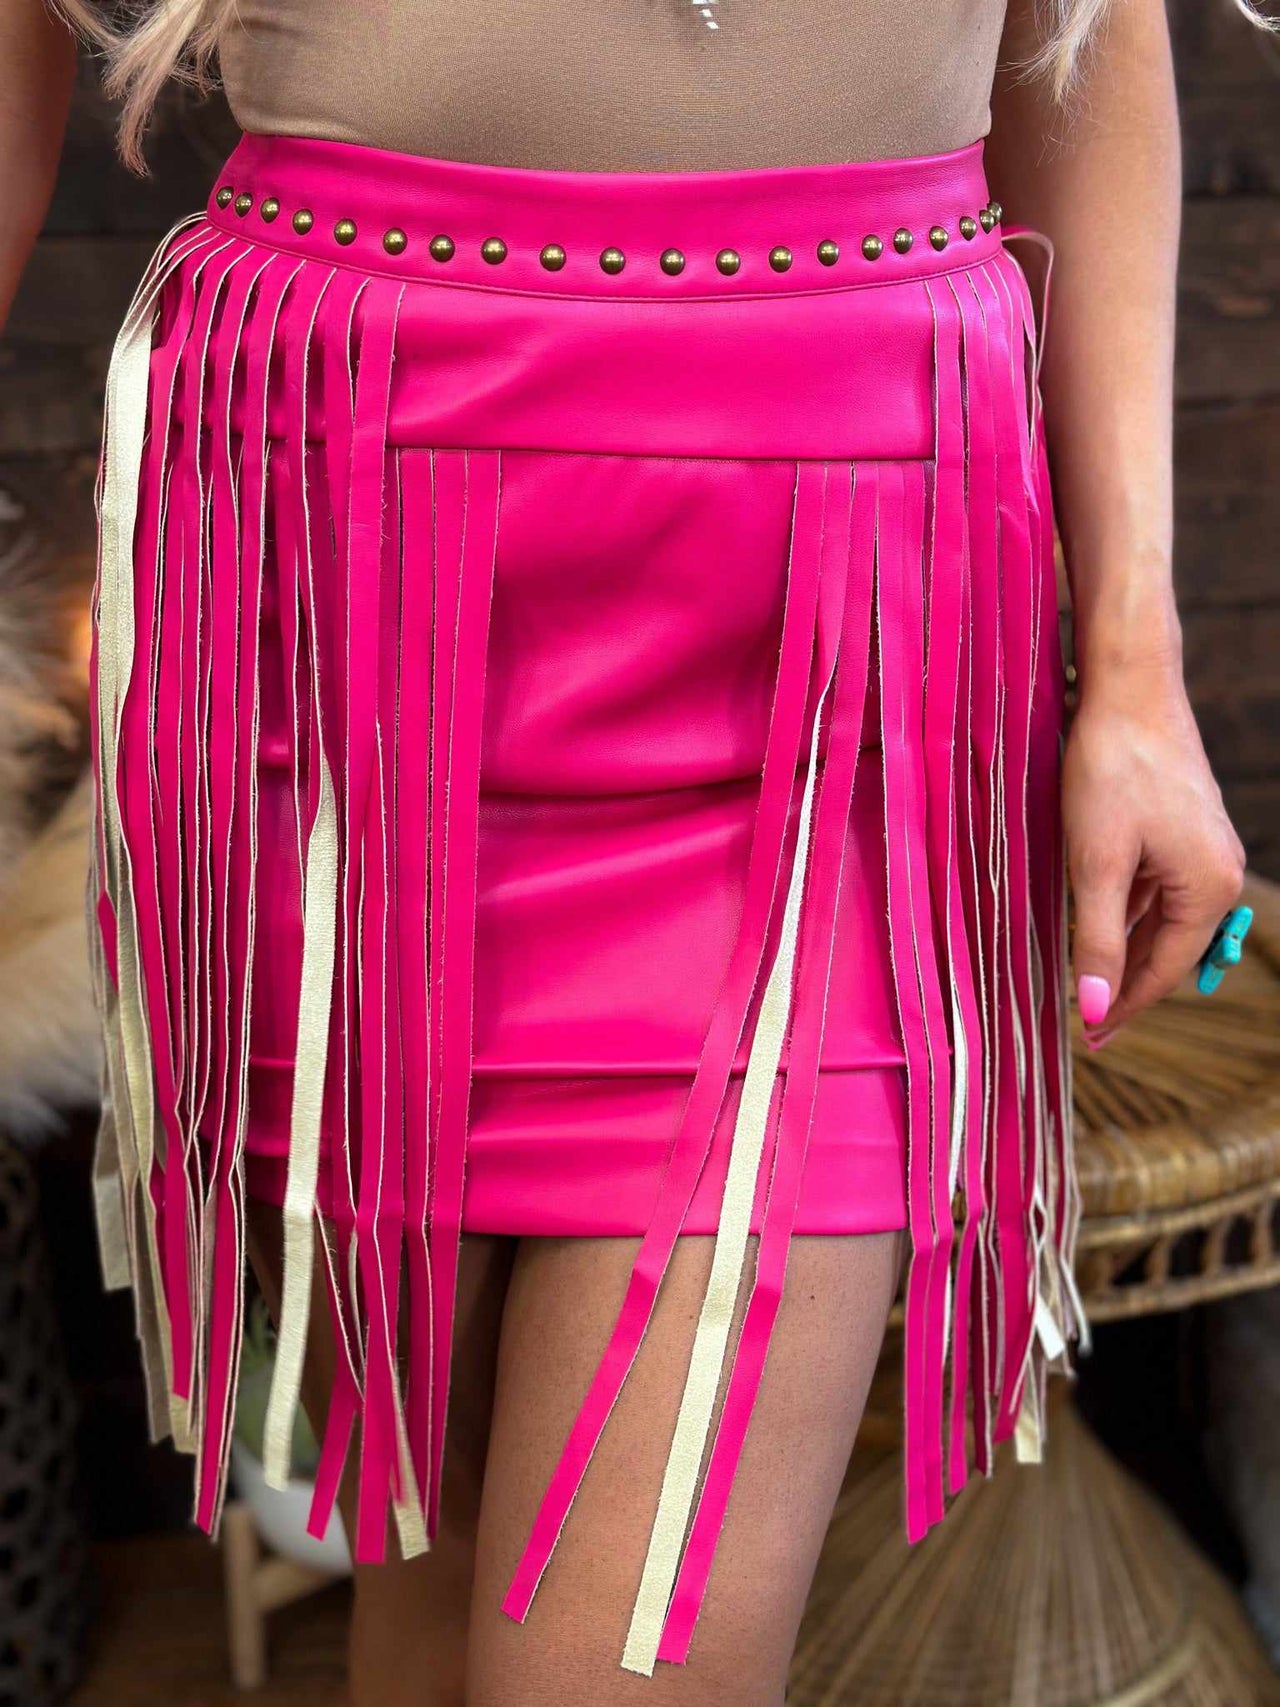 Western faux leather pink mini skirt